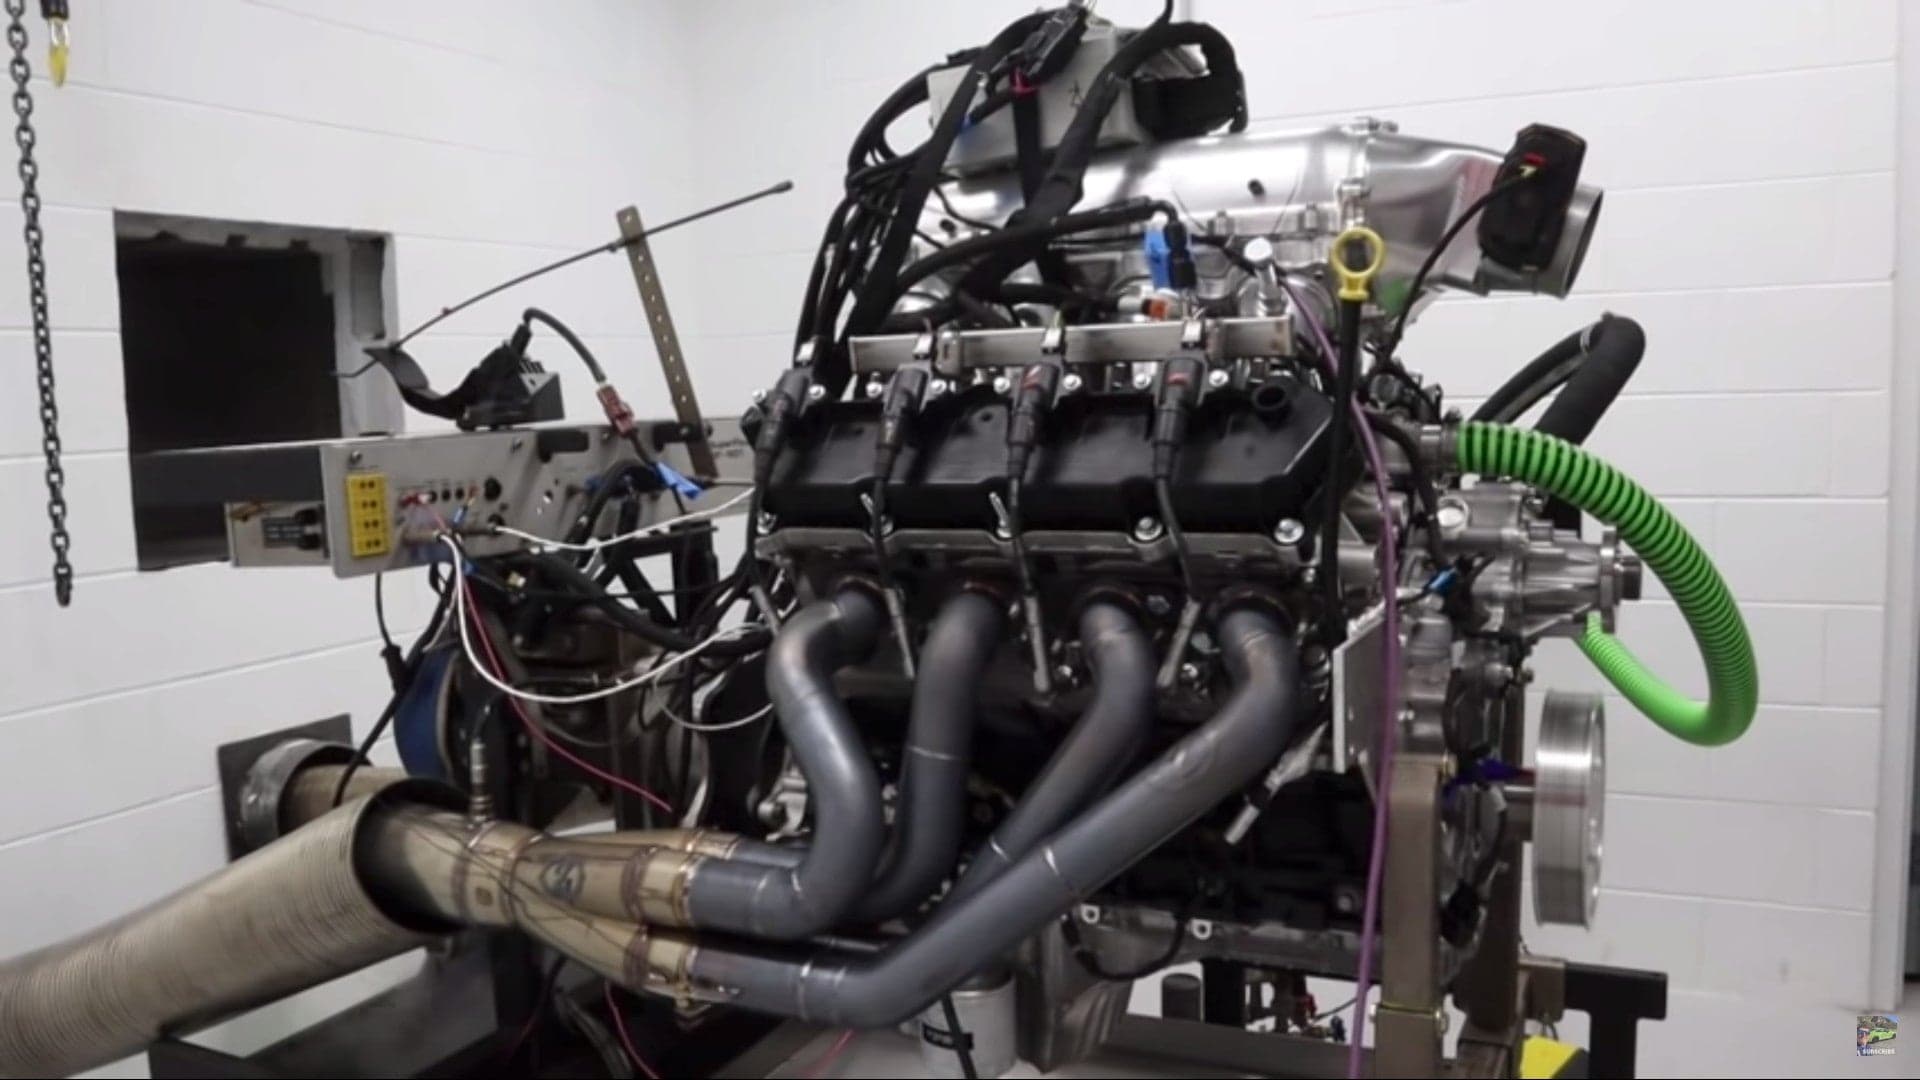 This Tuner Pushed Ford’s 7.3L V8 to 780 HP Without Boost